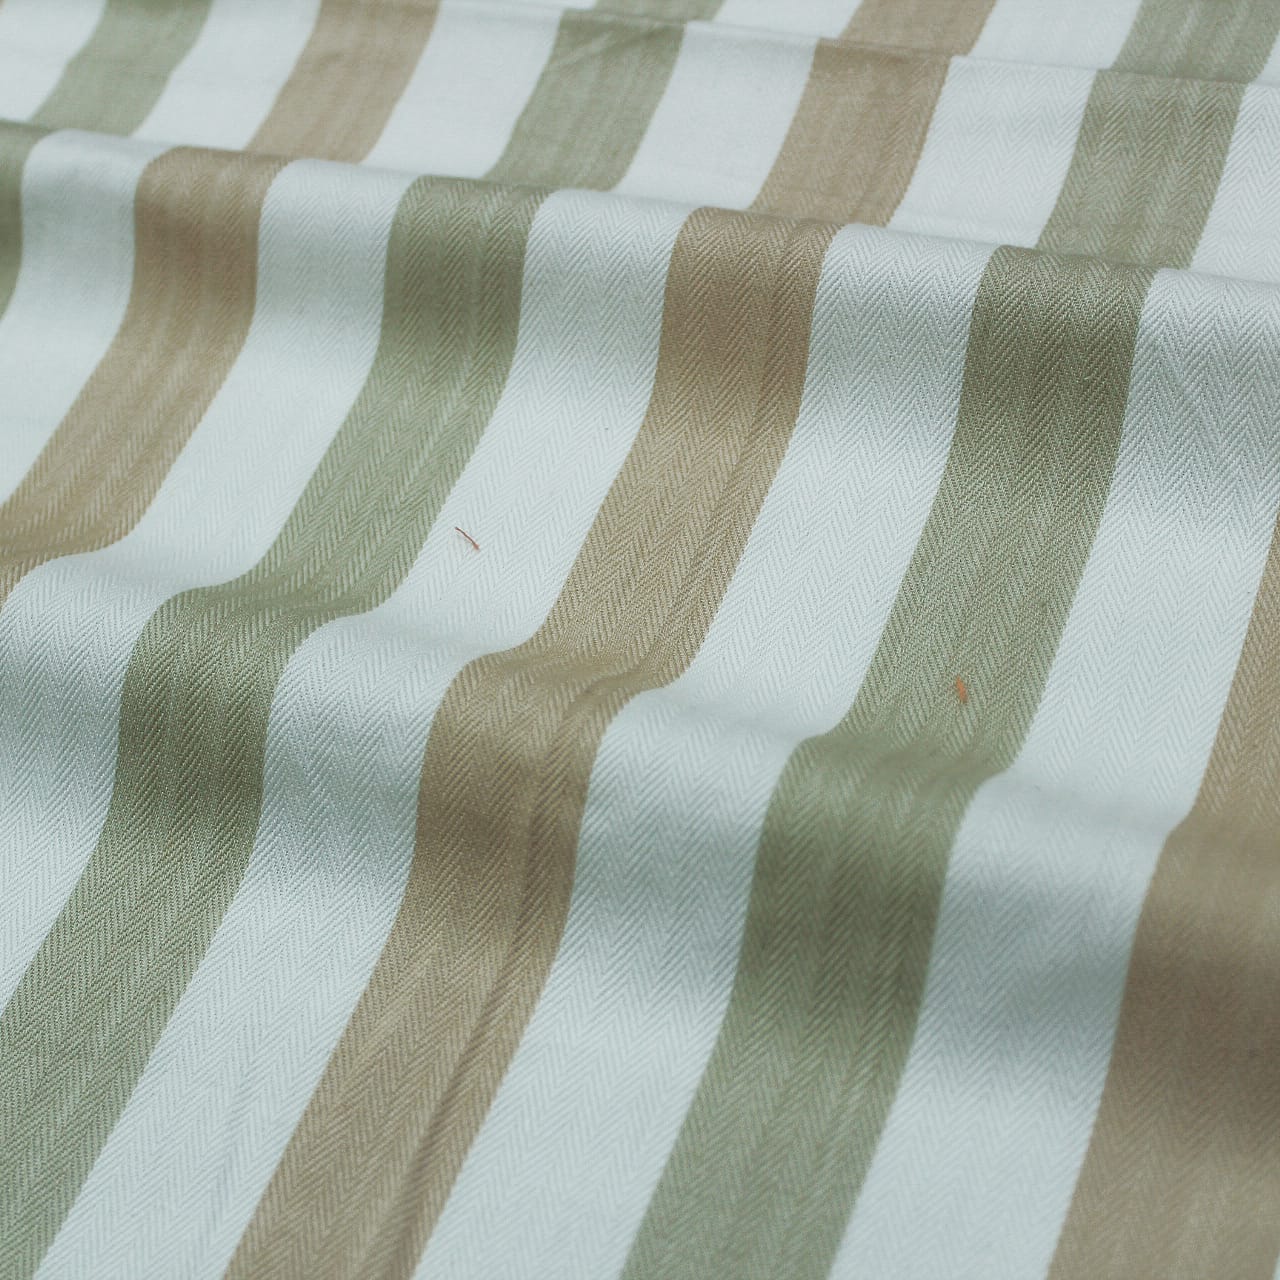 Alpha Beige Woven Cotton Stripes Table Cover(1 Pc) online in India